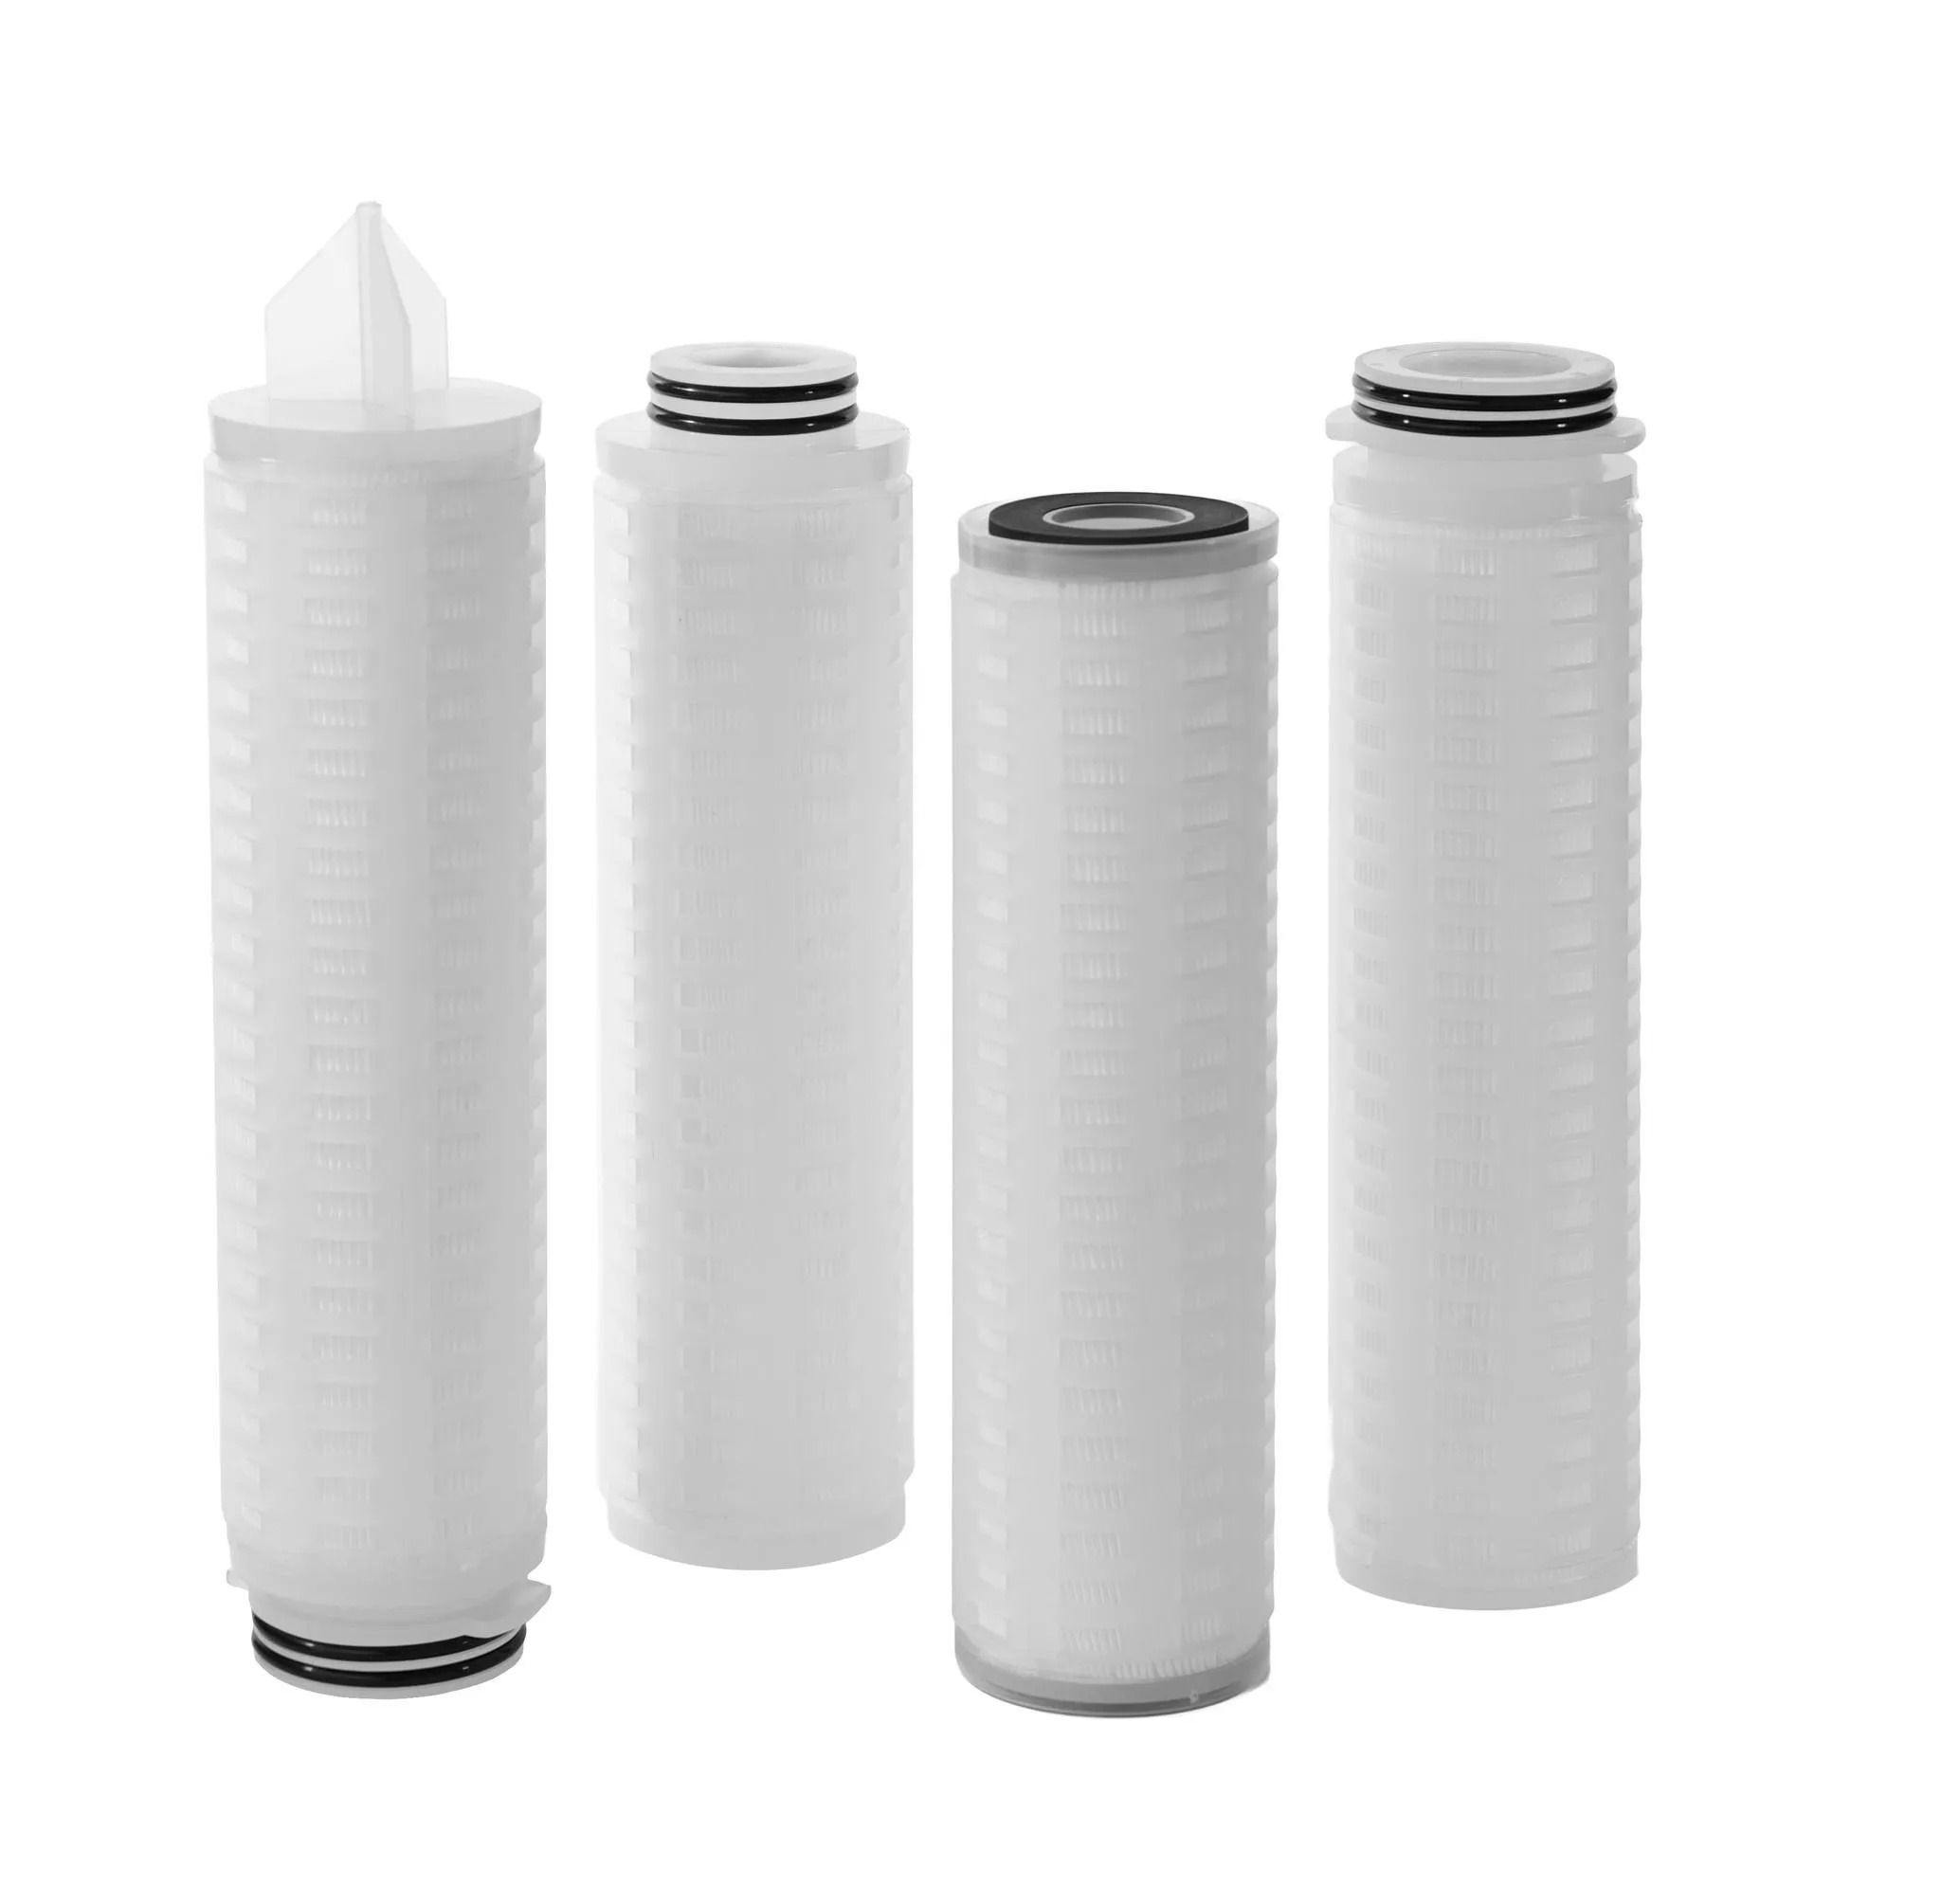 TCPX Filters: The Ultimate Filtration Solution for High Purity Applications cover image